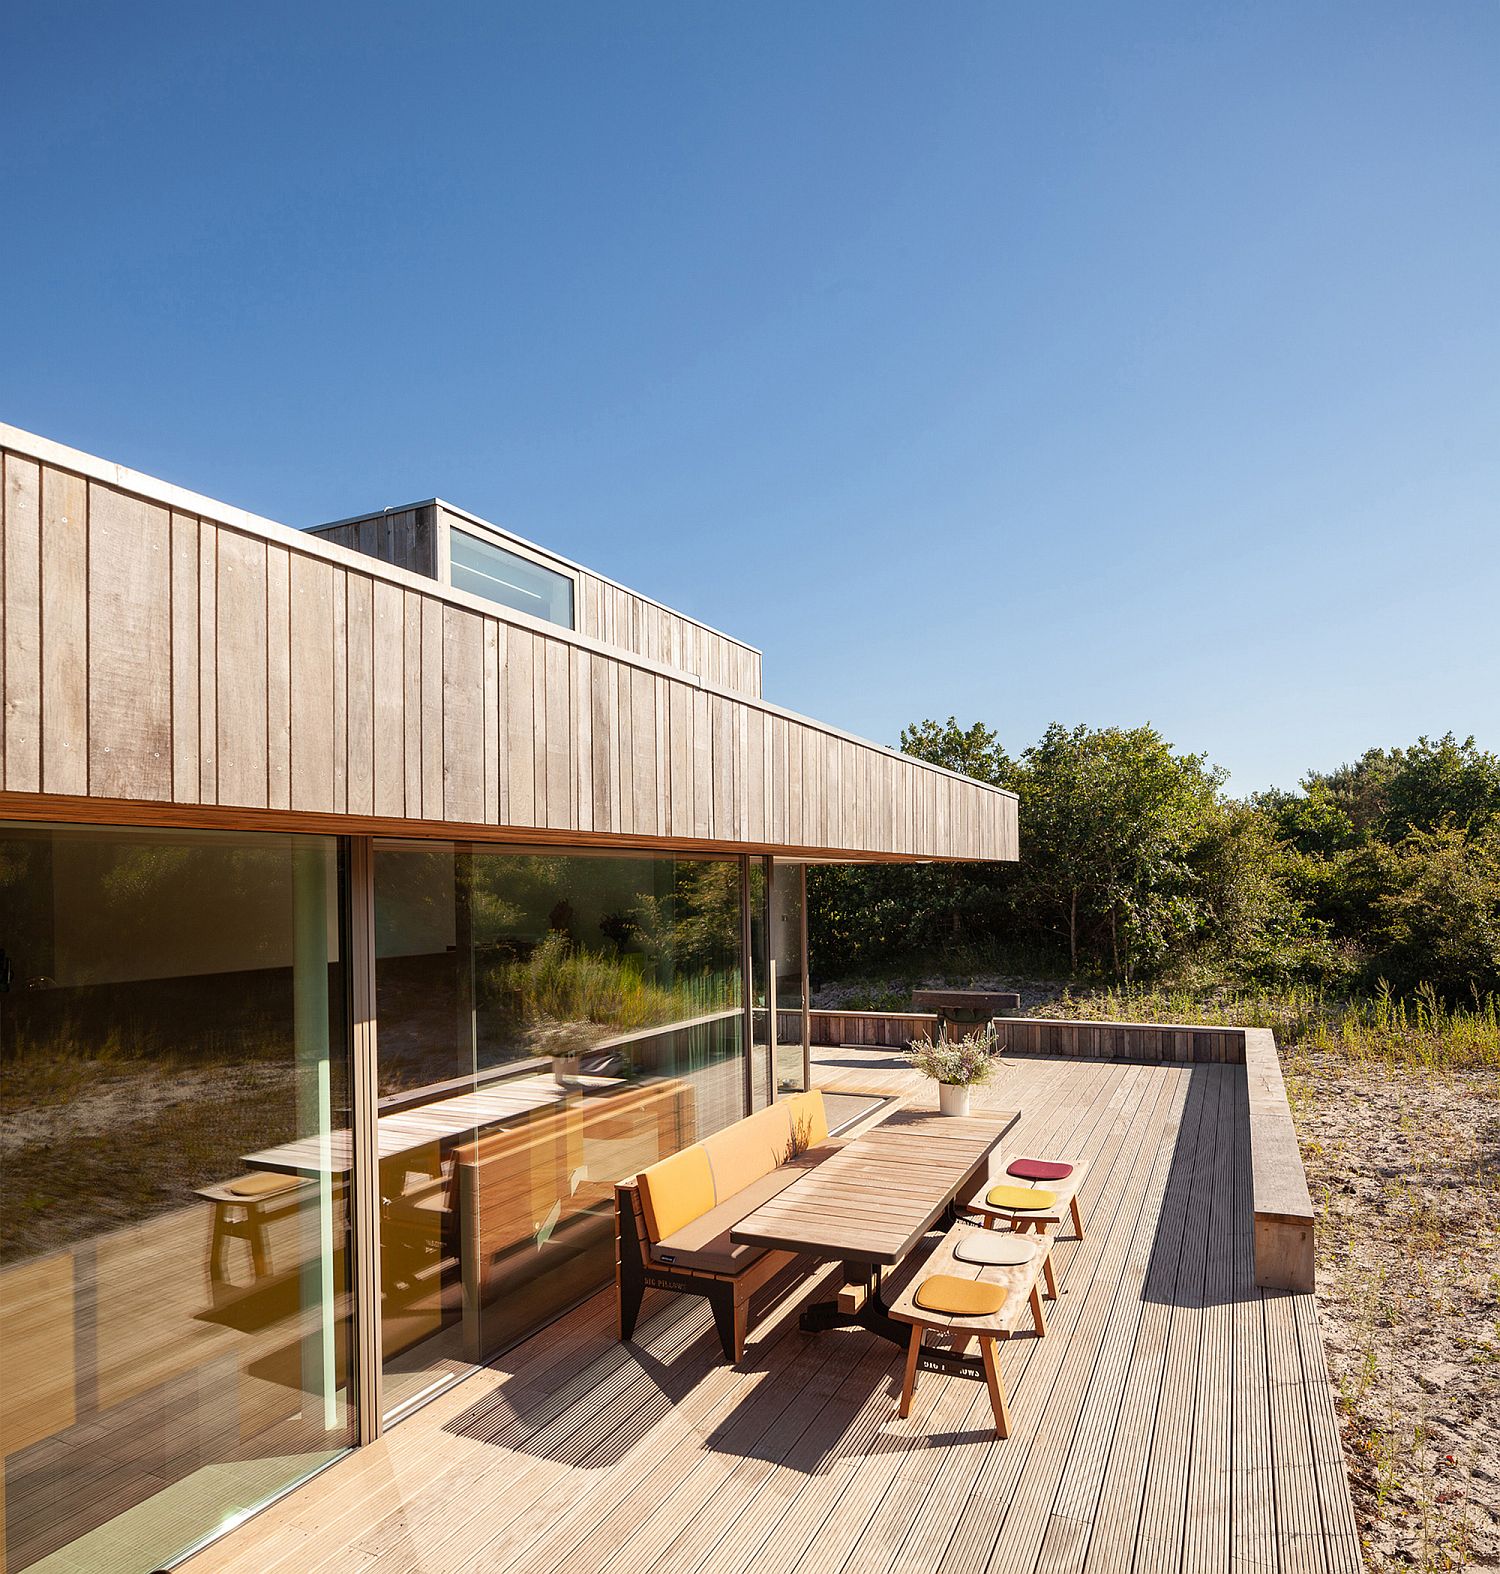 Sweeping-wooden-deck-outside-offers-connectivity-with-nature